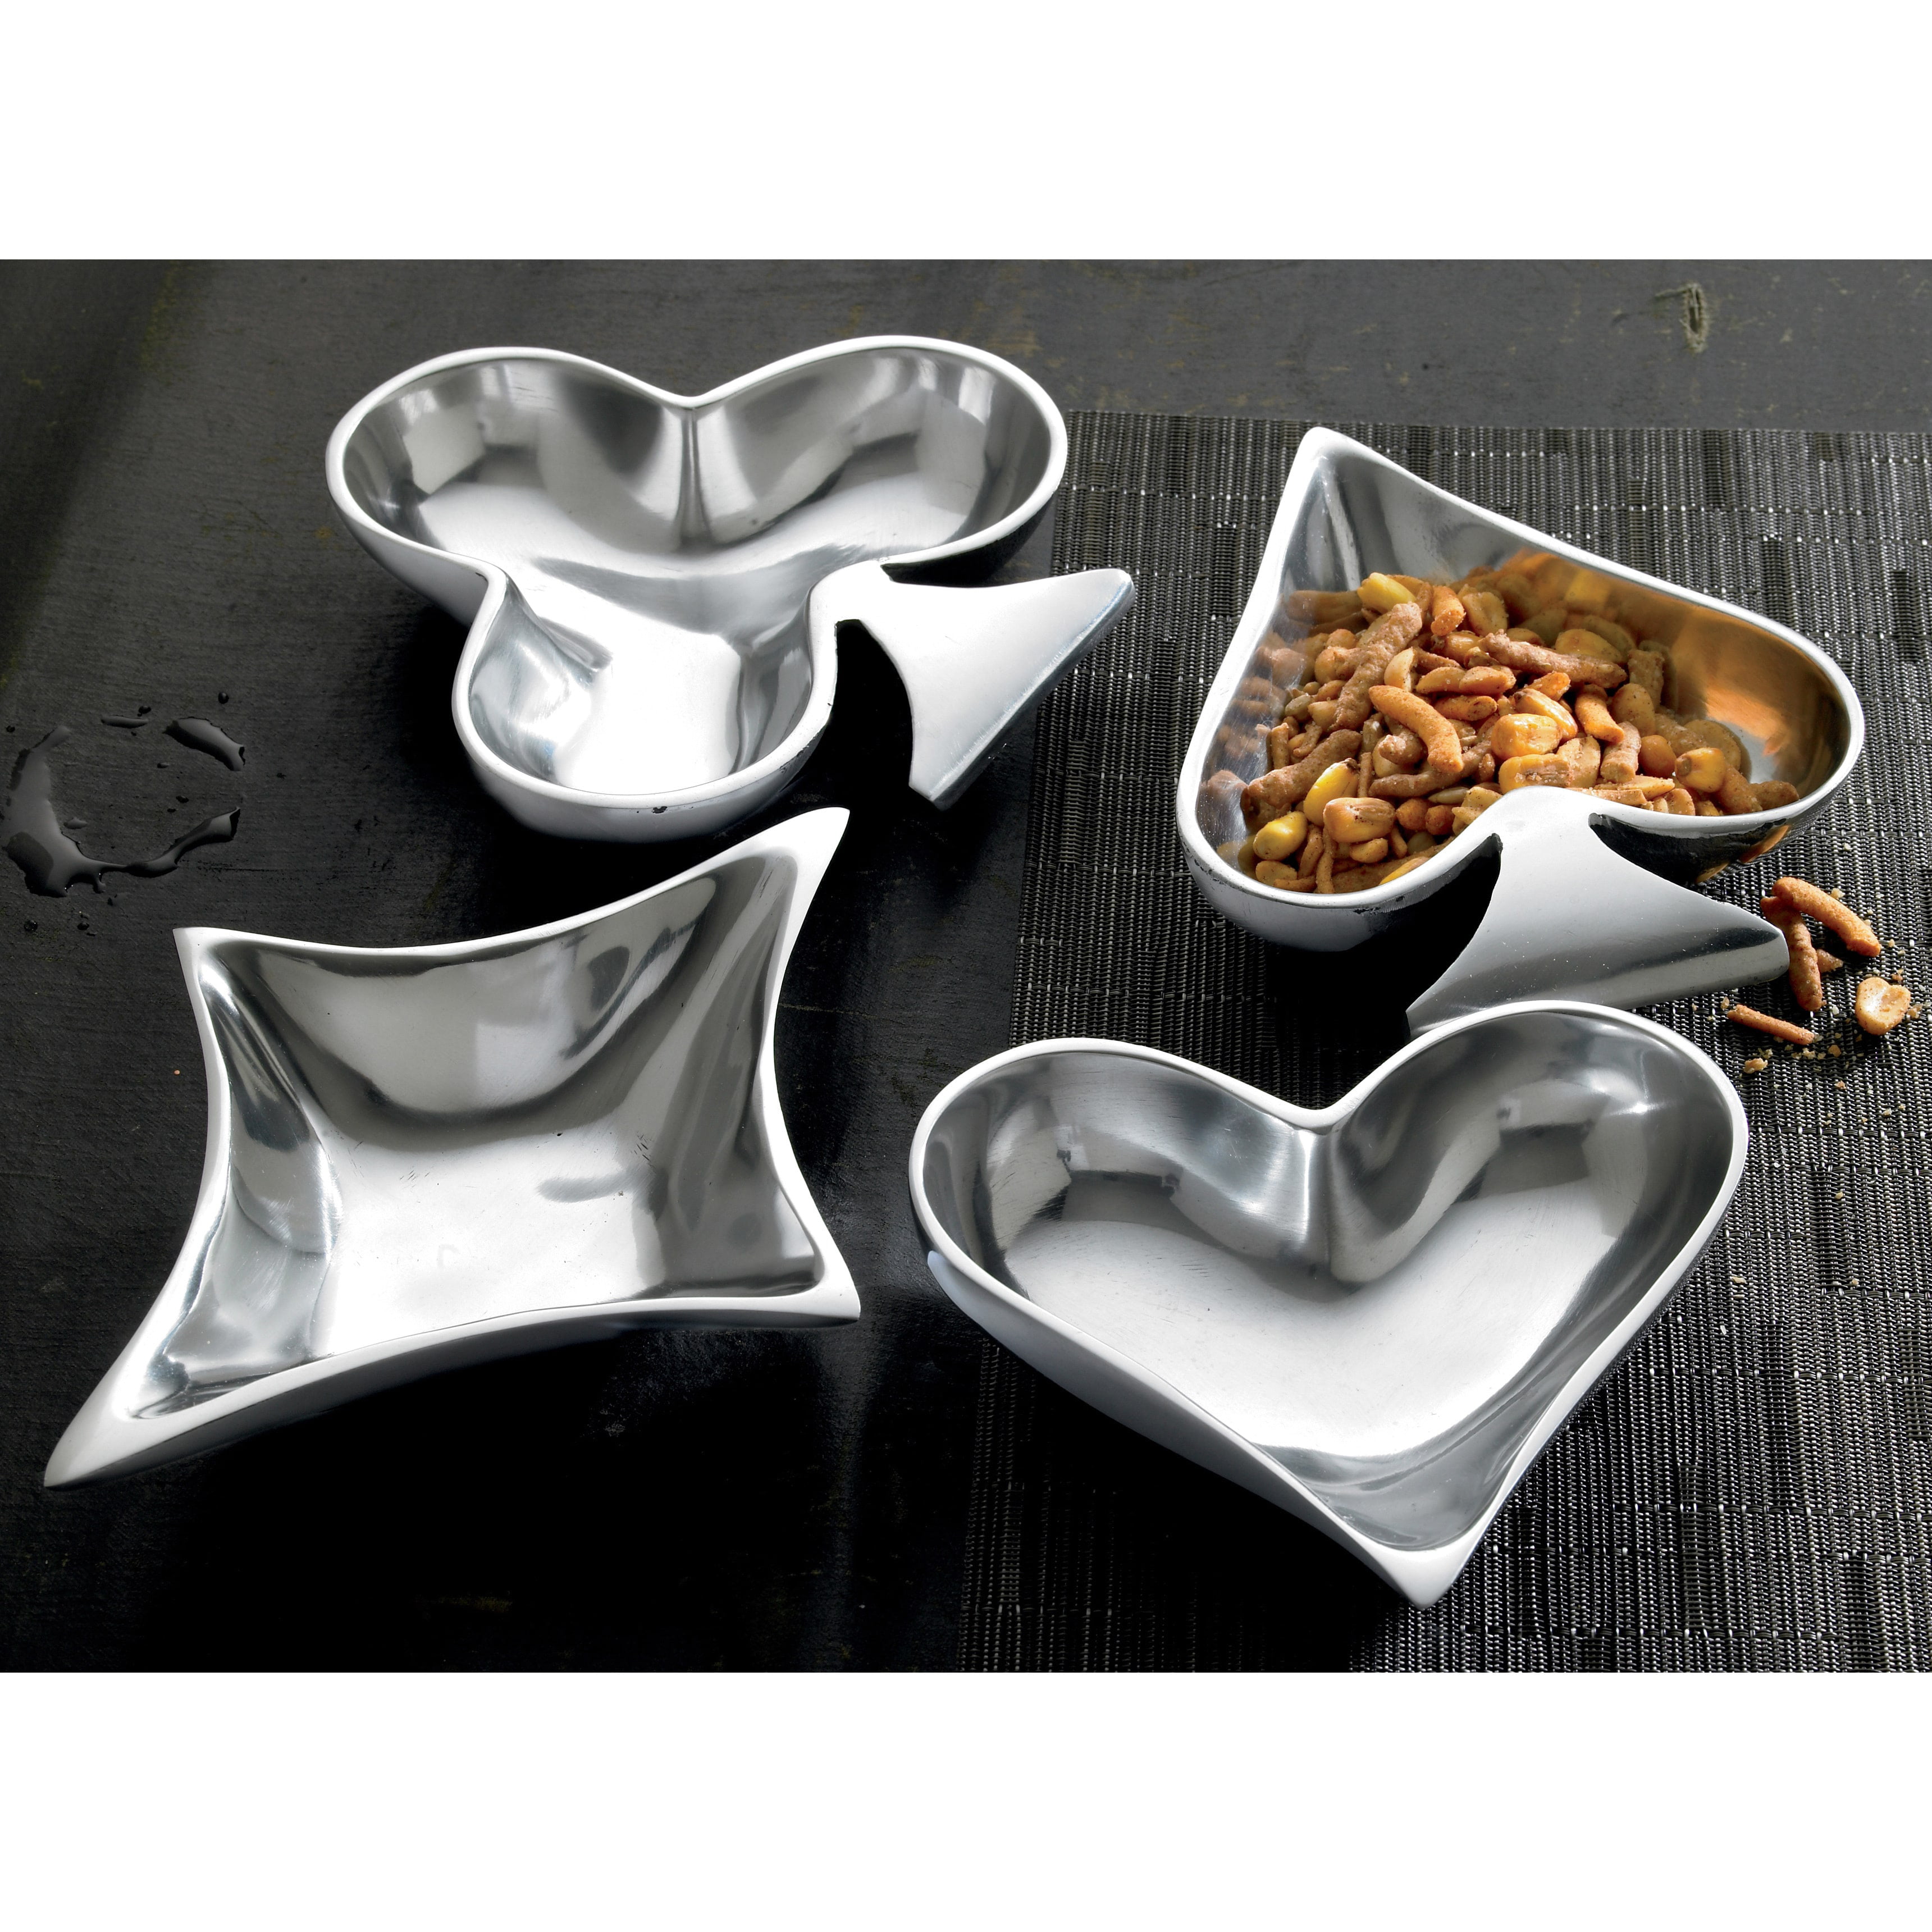 Set of 4 Playing Card Suits Aluminum Dish Set by KINDWER